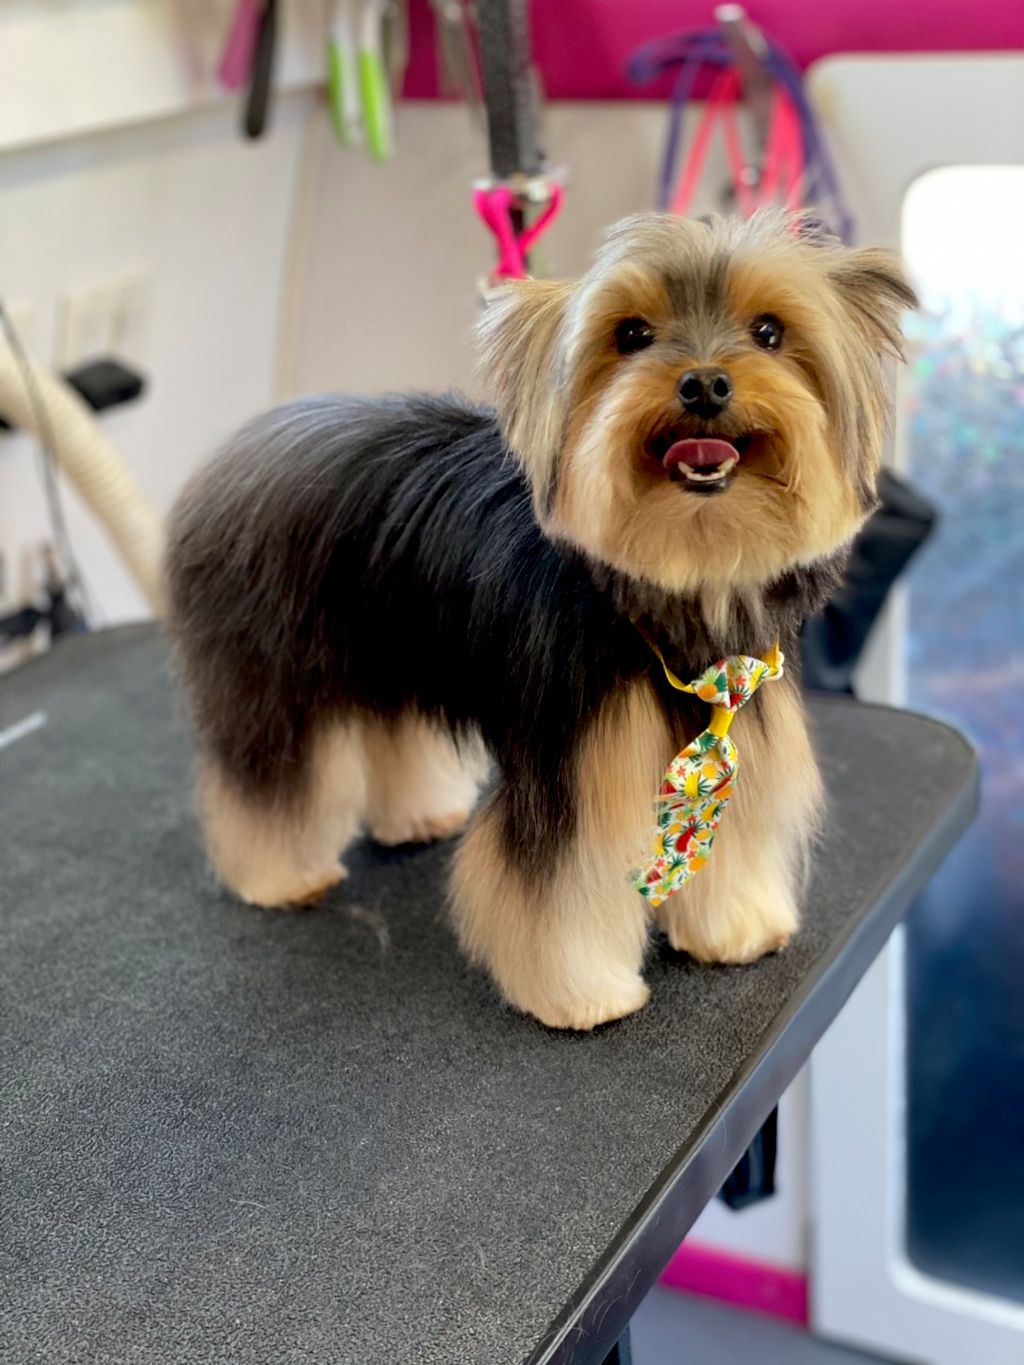 Wiggles And Wags Mobile Dog Spa